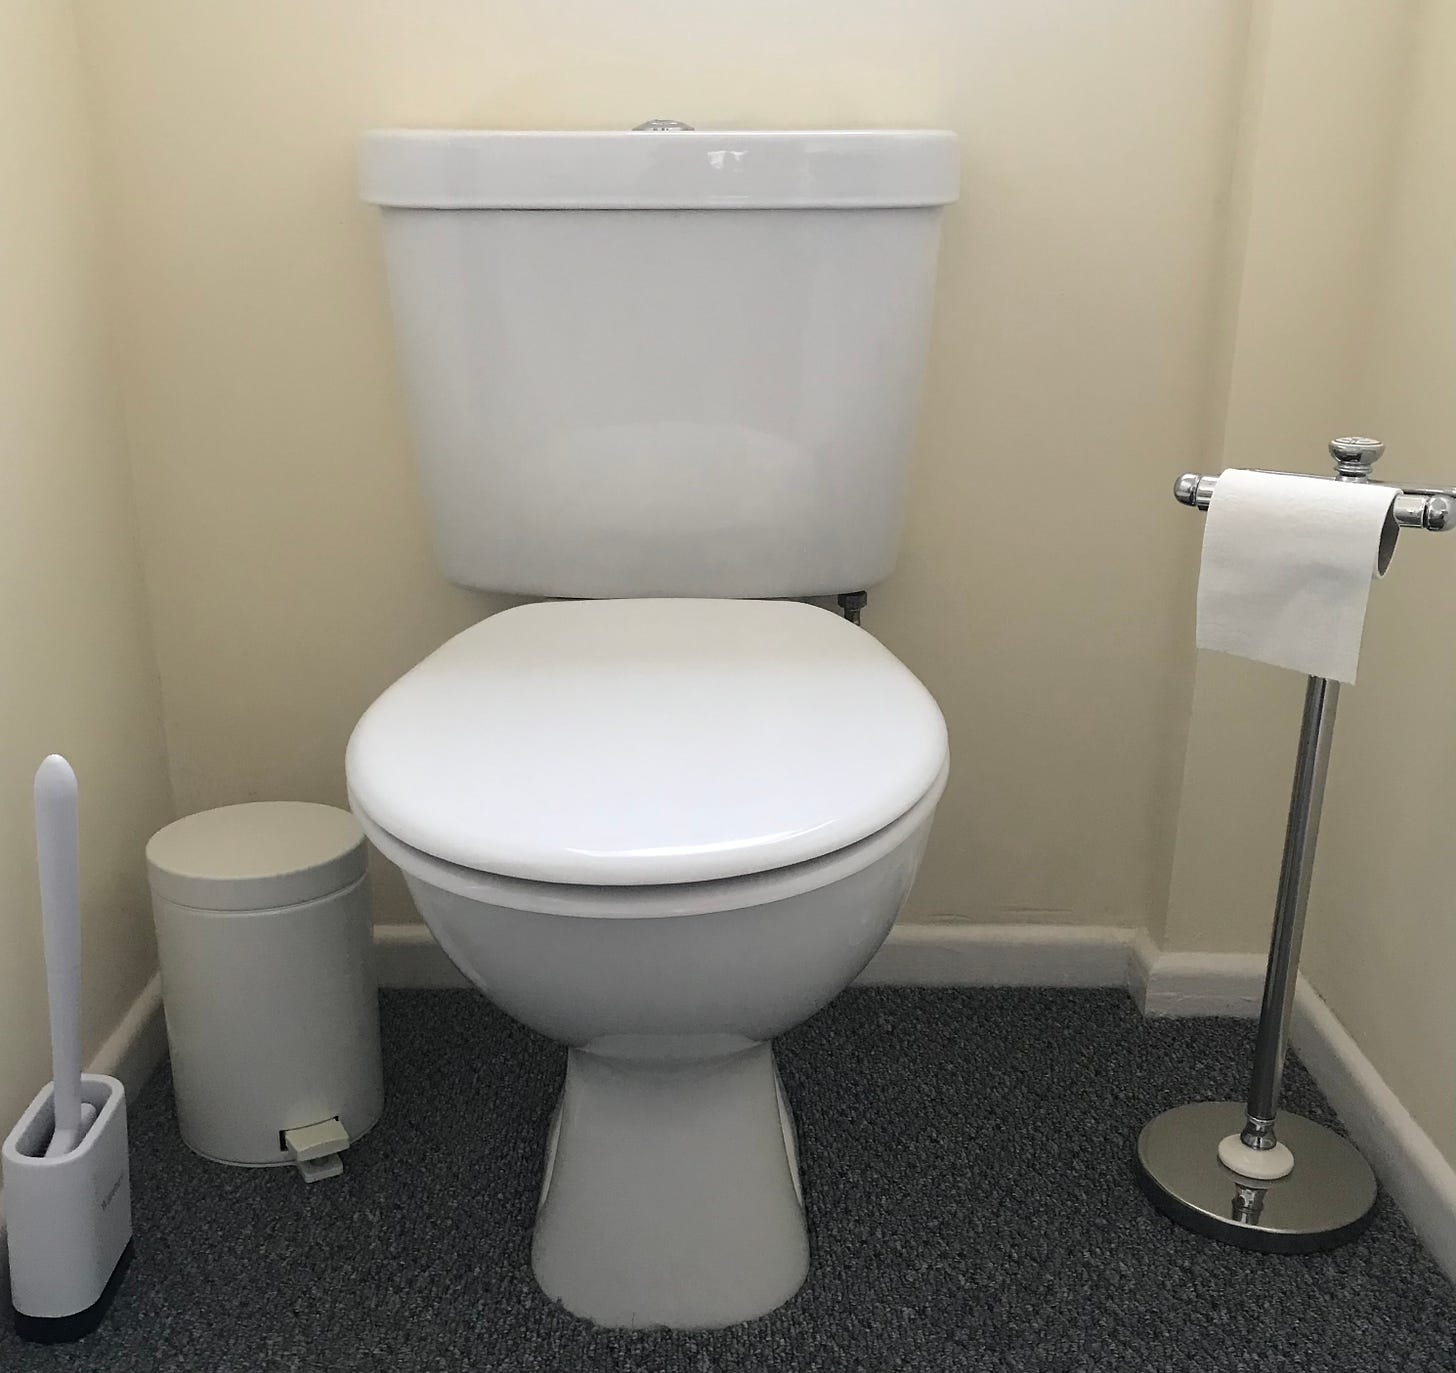 A picture of a modern flushing toilet, with a toilet paper holder waste bin and brush. Image: Roland's Travels